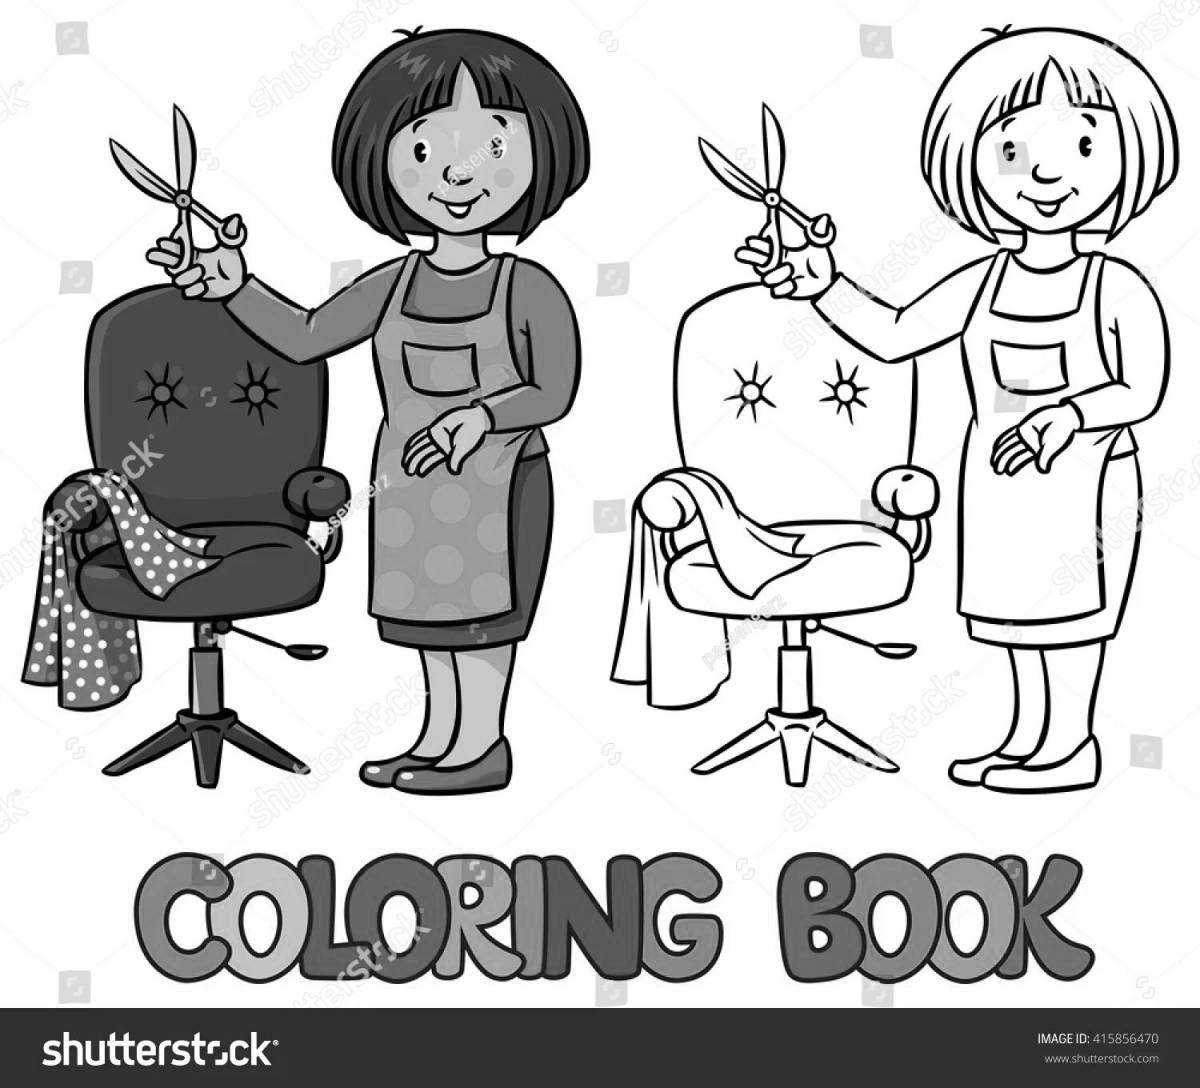 Bright hairdresser coloring book for kids